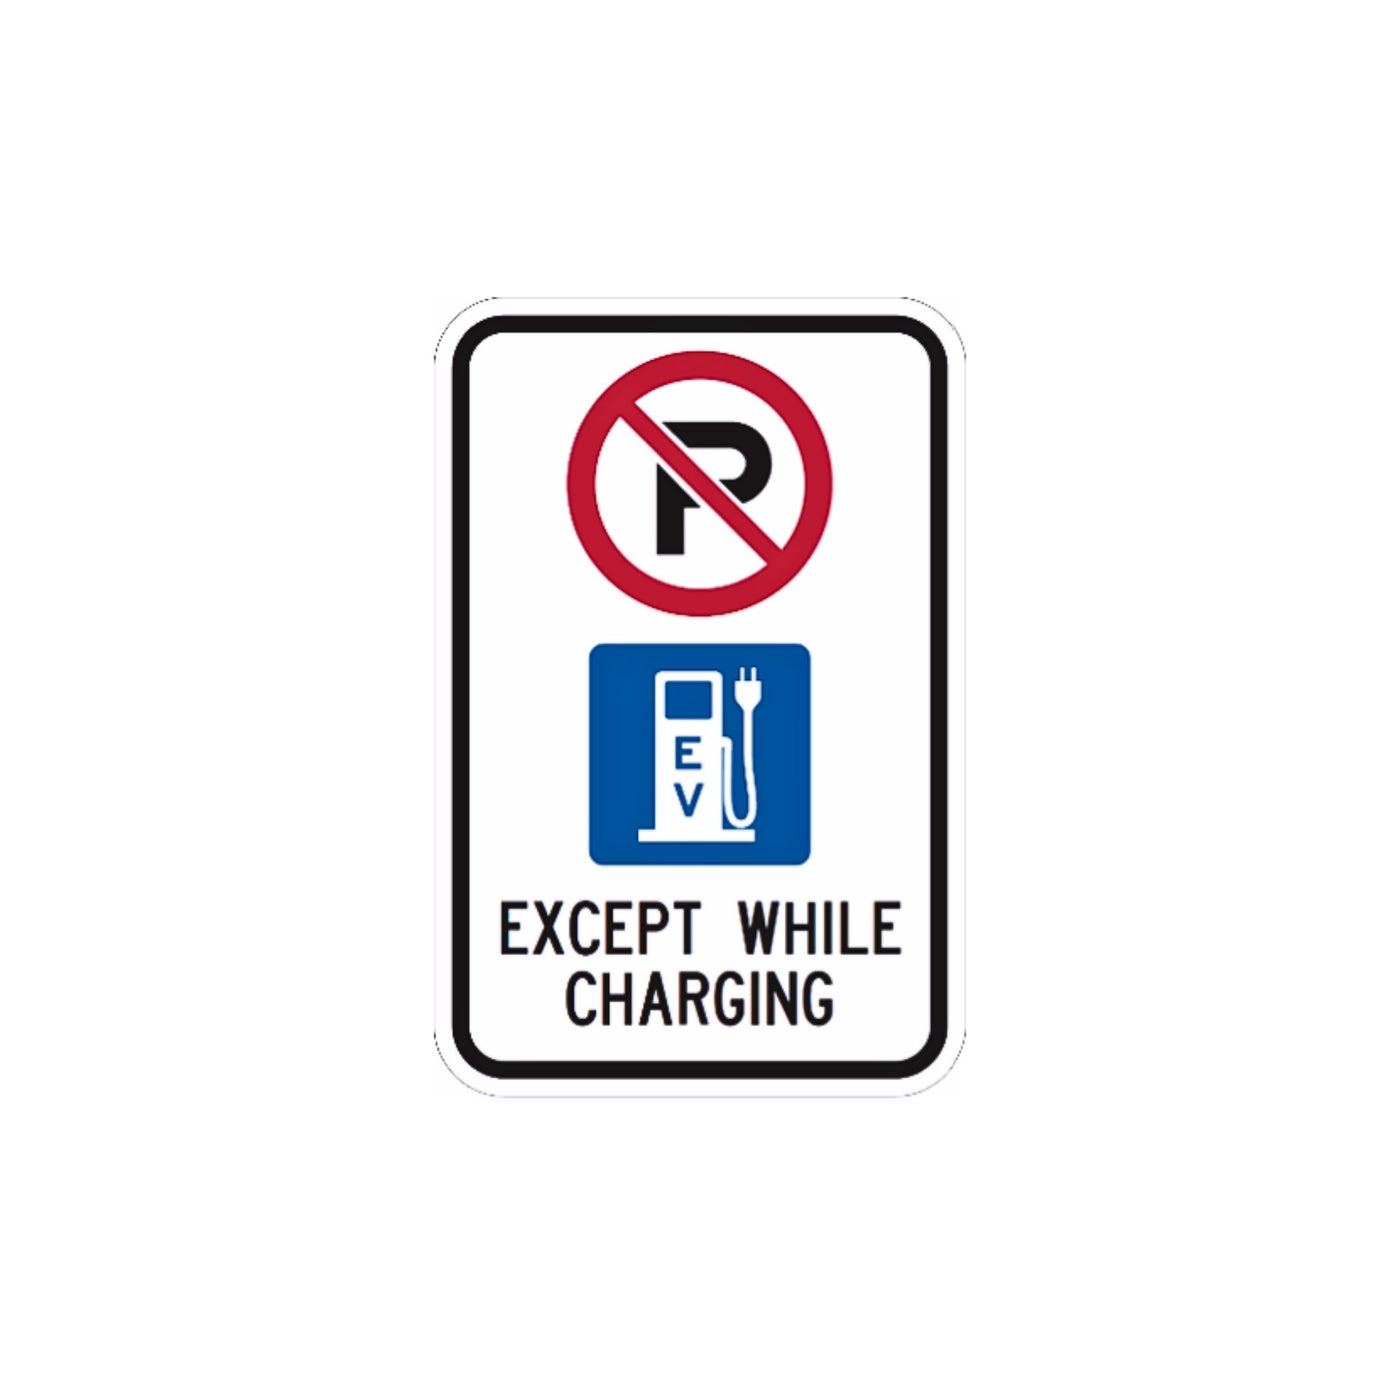 EV Parking Only While Charging Sign English 2048x2048